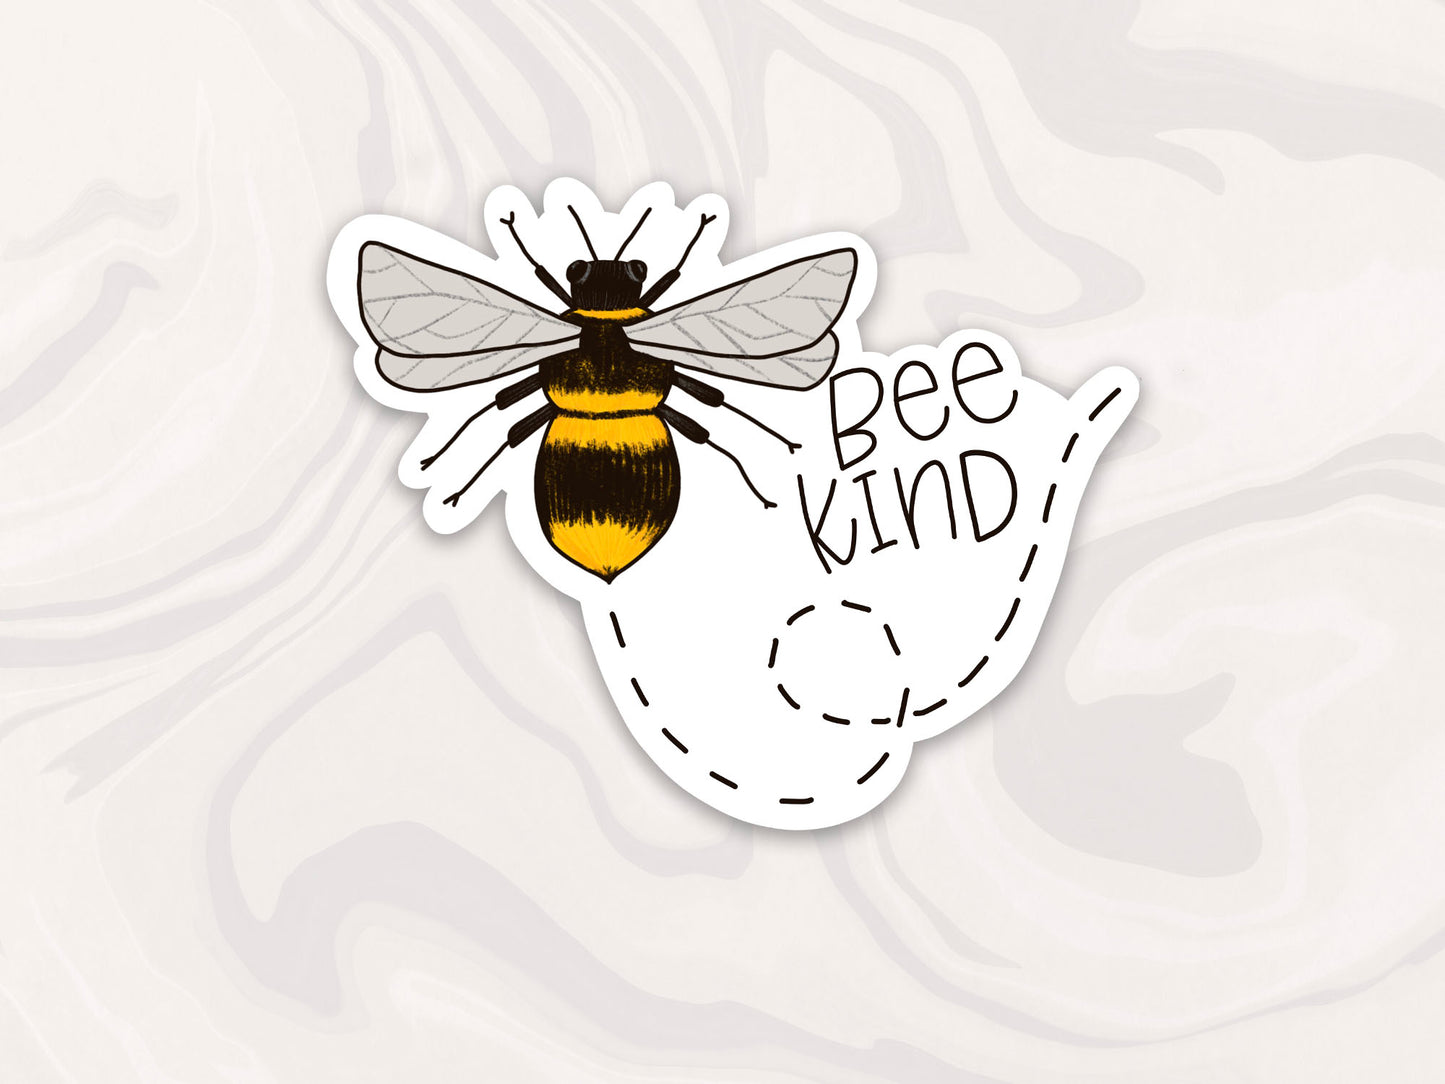 bumble bee sticker set, set of 4 bee themed stickers with positive and encouraging messages, bee kind sticker